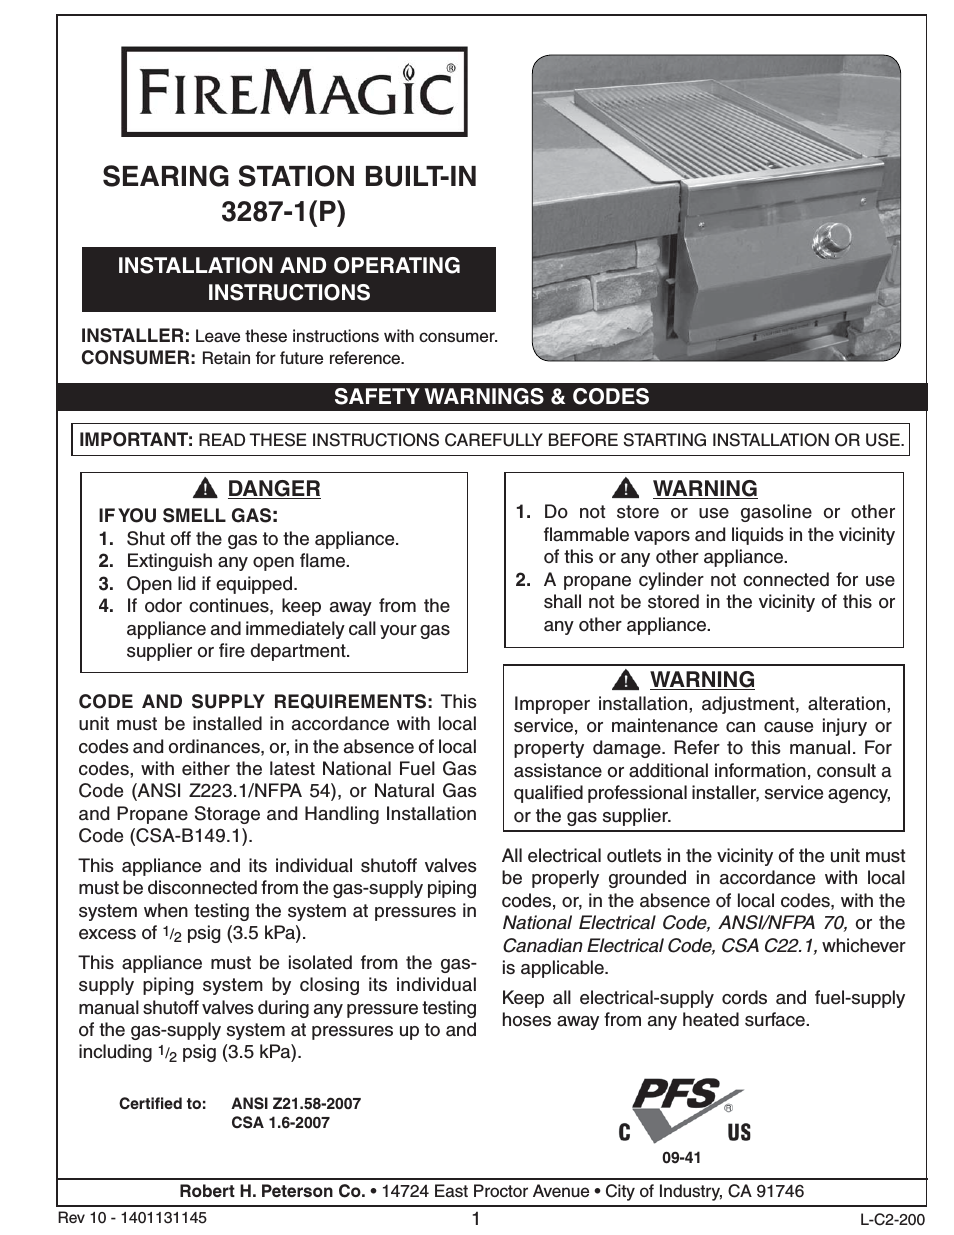 3287-1(P) Searing Station Built in